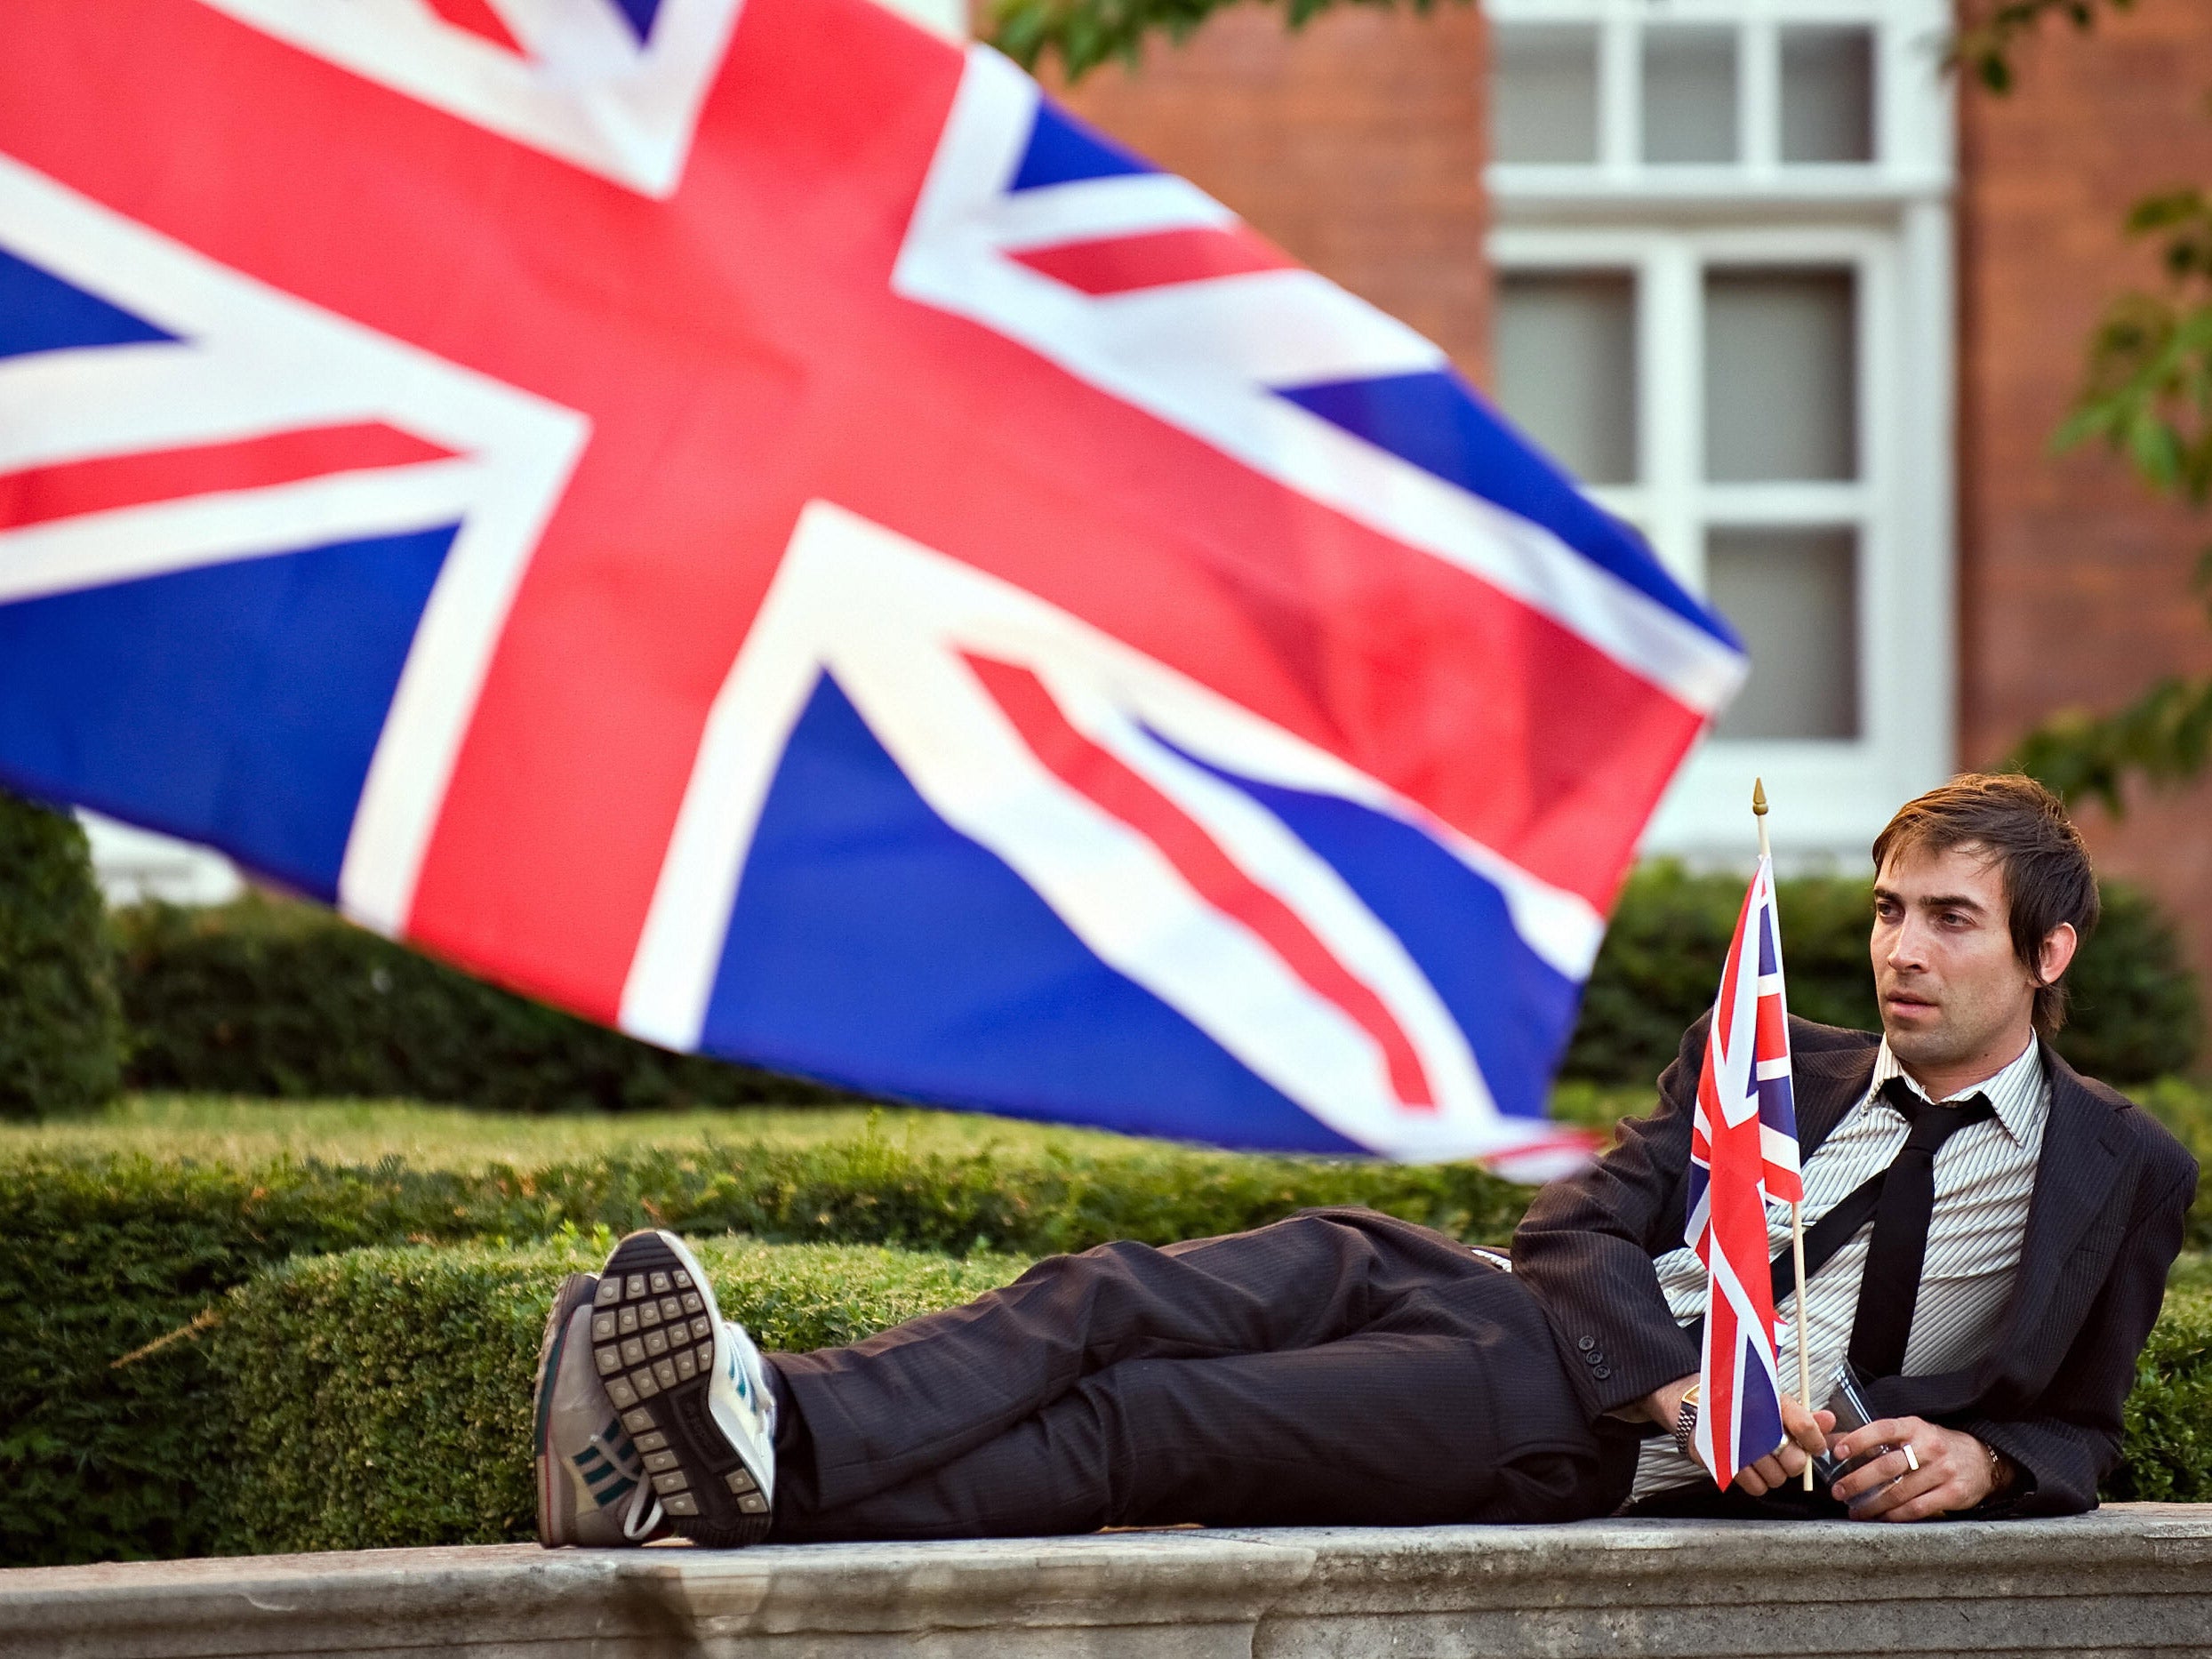 Despite a lift from the London Olympics in 2012, patriotism in the UK appears to be declining